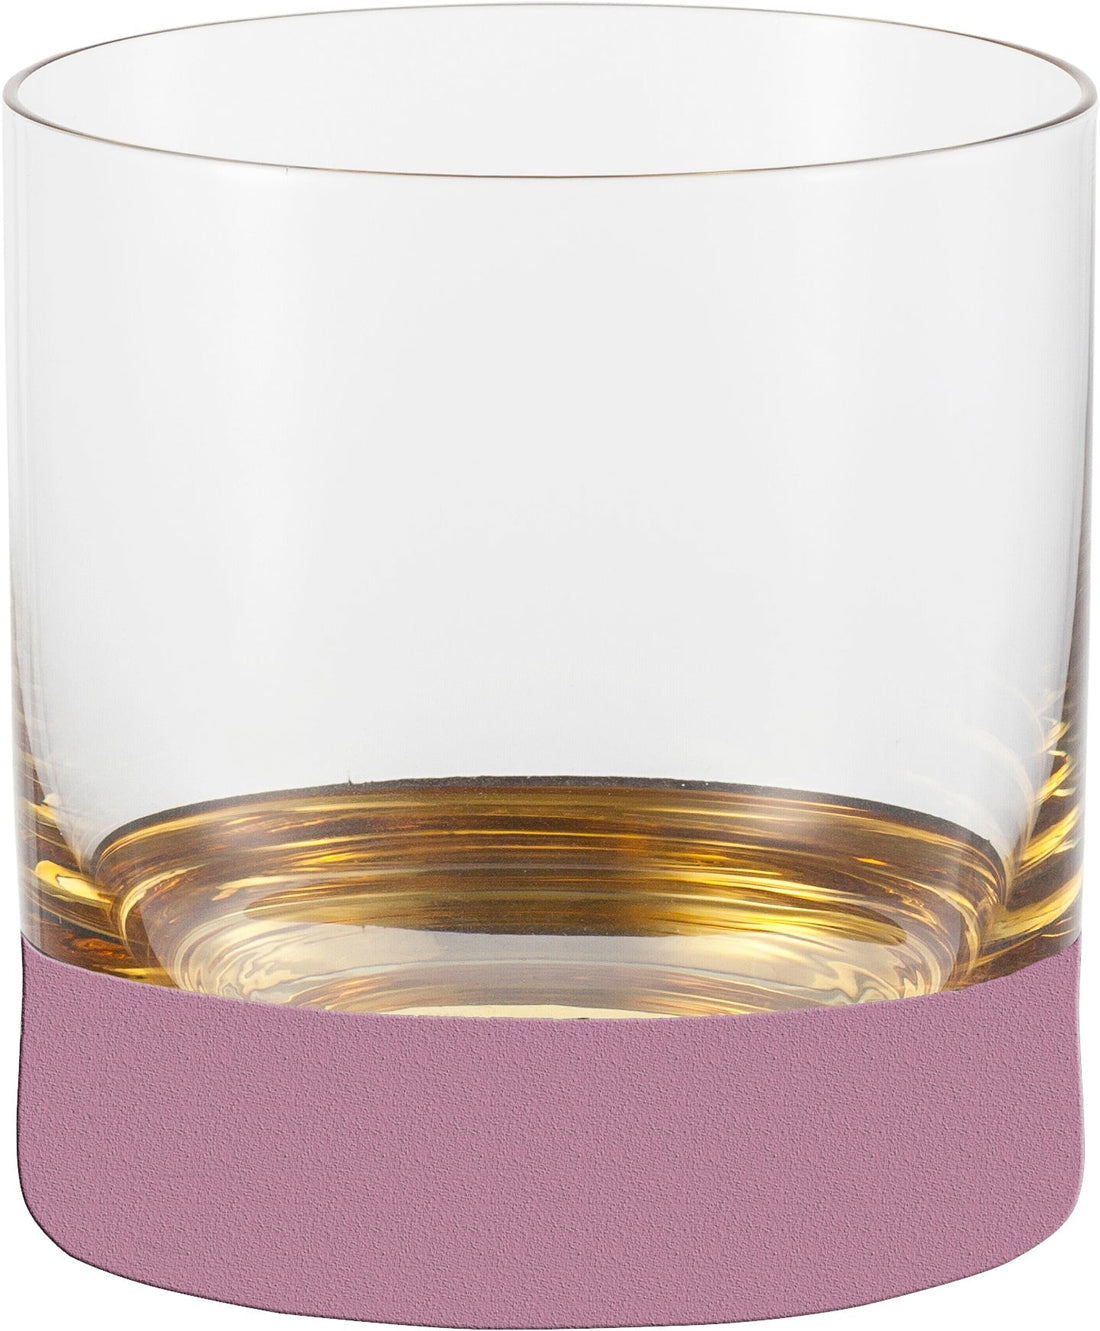 ORO24k Crystal 24k Wiskey/ Double Old Fashioned Set of 2 - nicolettemayer.com